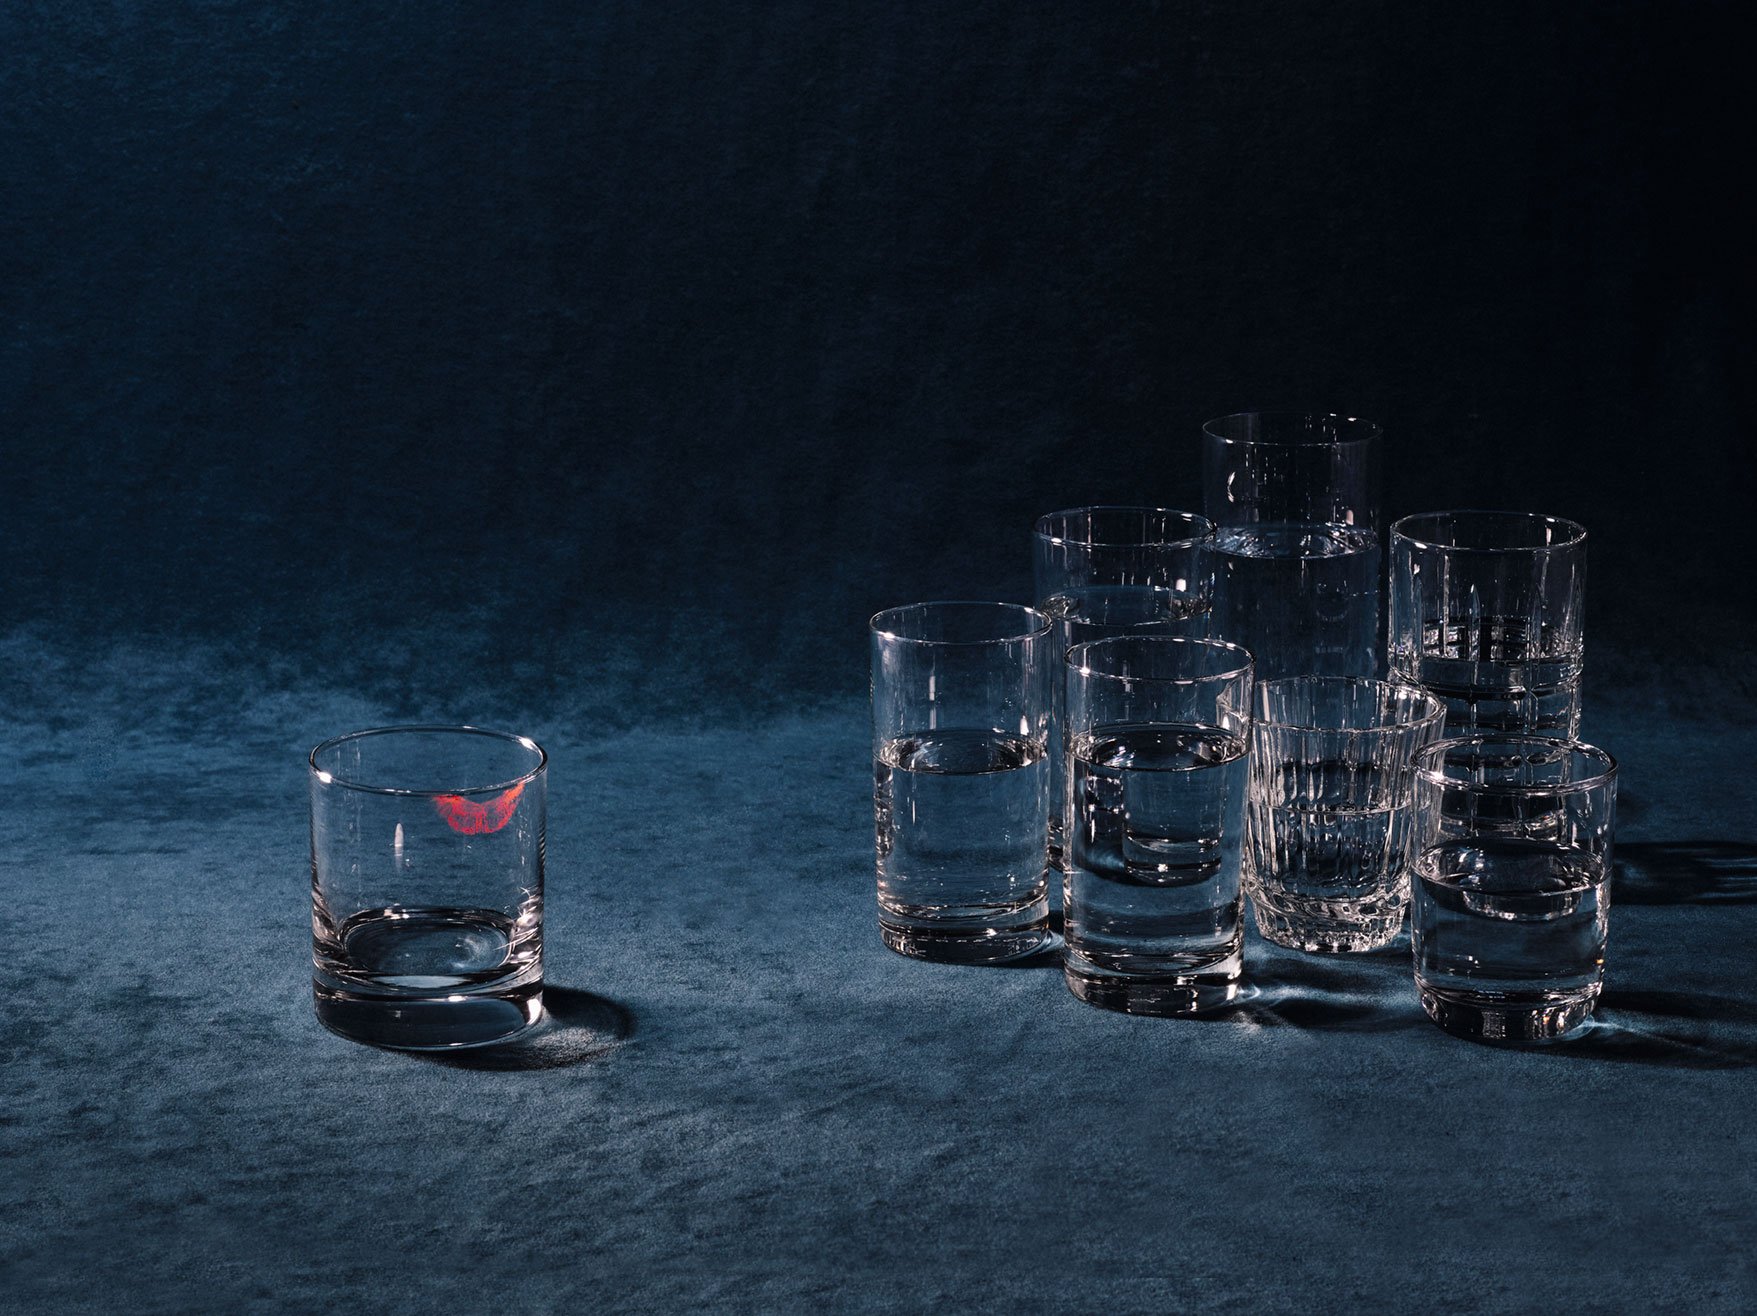 Still life image of various clear cups with one removed from the group and stained with a lipstick kiss for Romance Journal Issue 02 Resistance. Publication design, art direction, print design by RoAndCo.